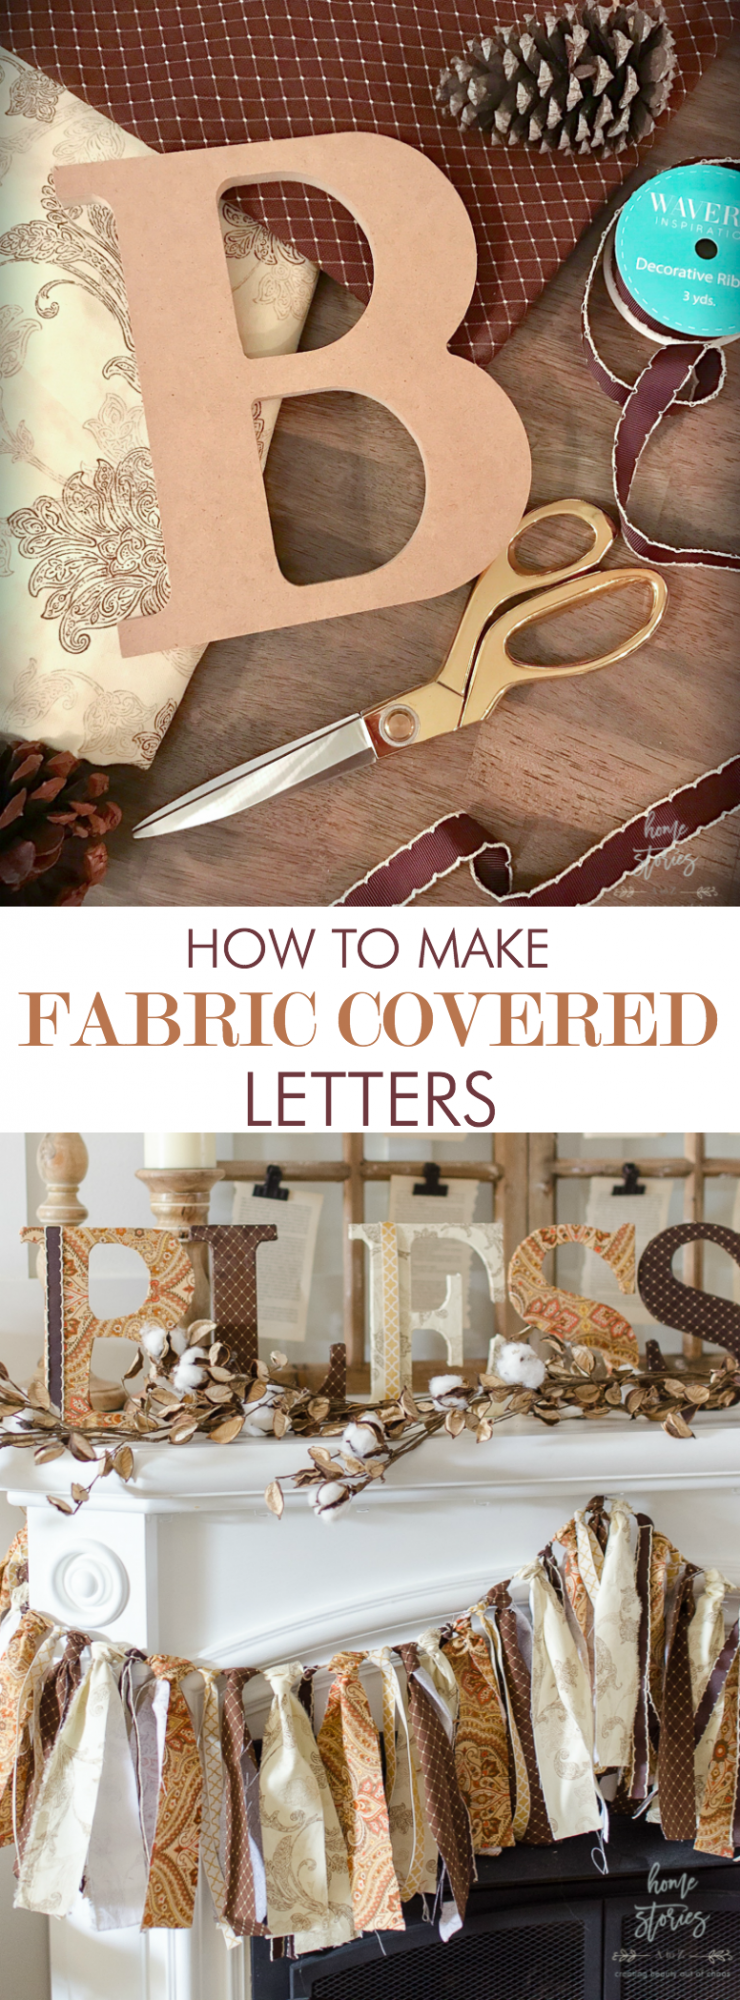 fabric covered letters decoupage